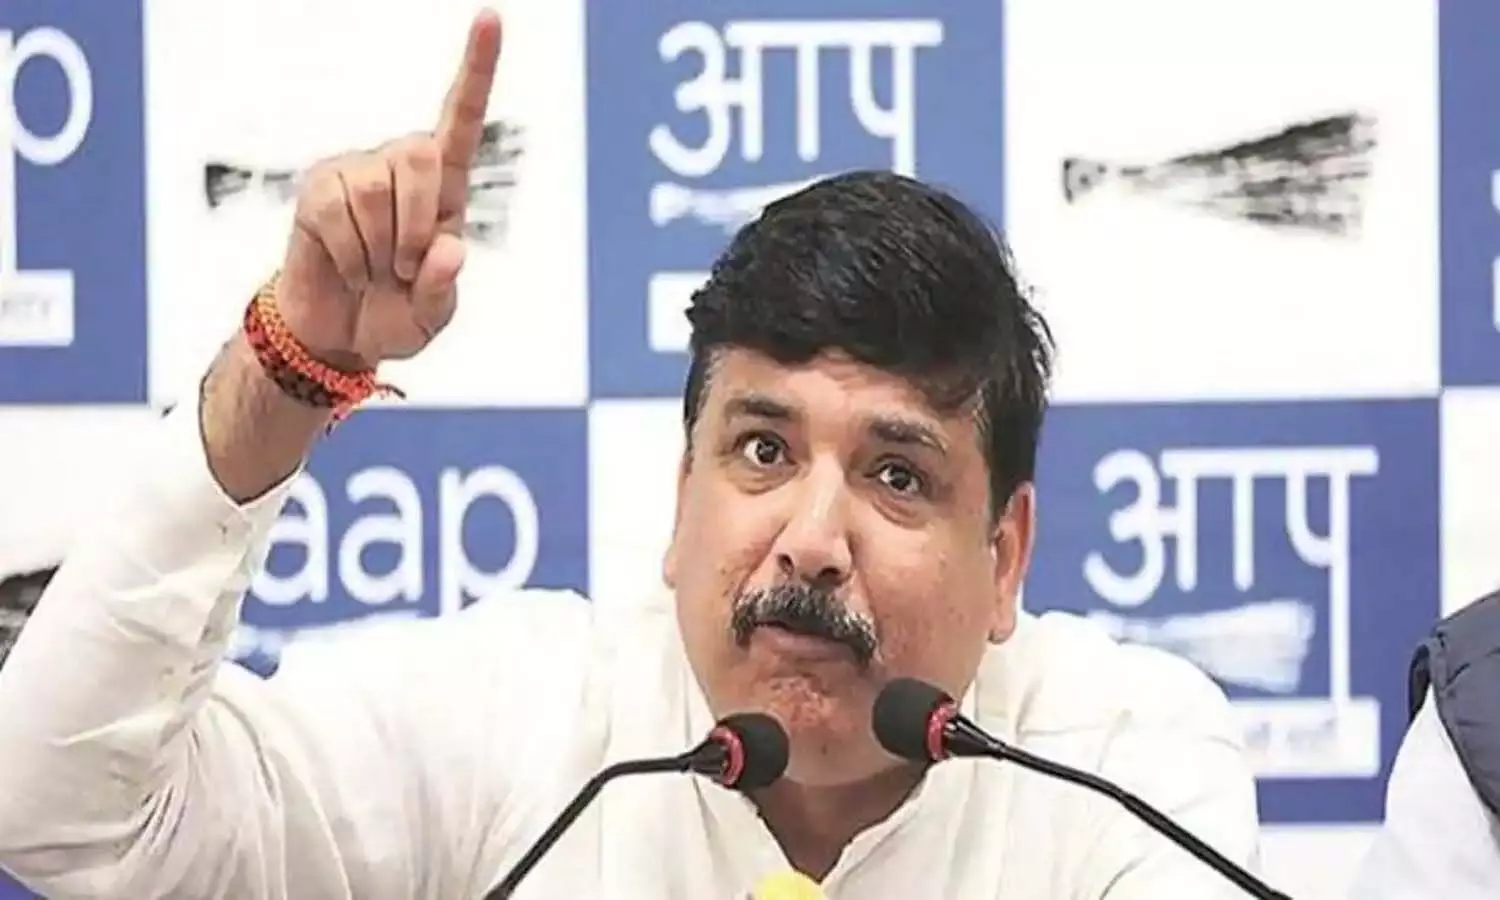 Aam Aadmi Party spokesperson Sanjay Singh made a big claim that AAP is also the Mayor of Delhi